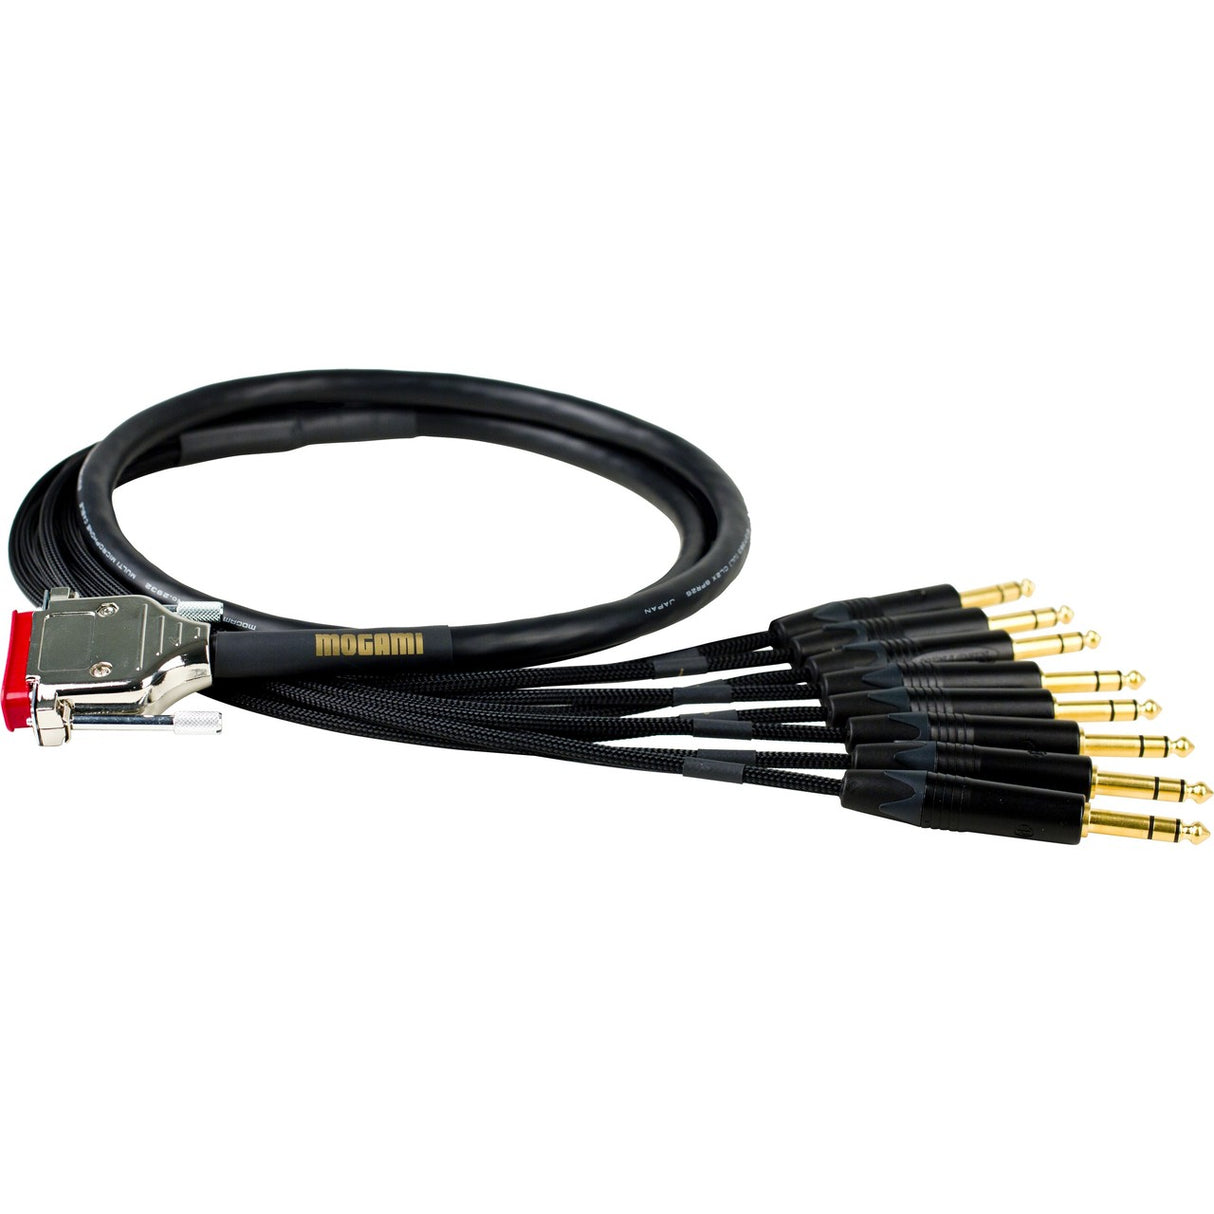 Mogami GOLD DB25-TRS-02 8-Channels Gold DB25 to TRS Male Cable, 2-Foot